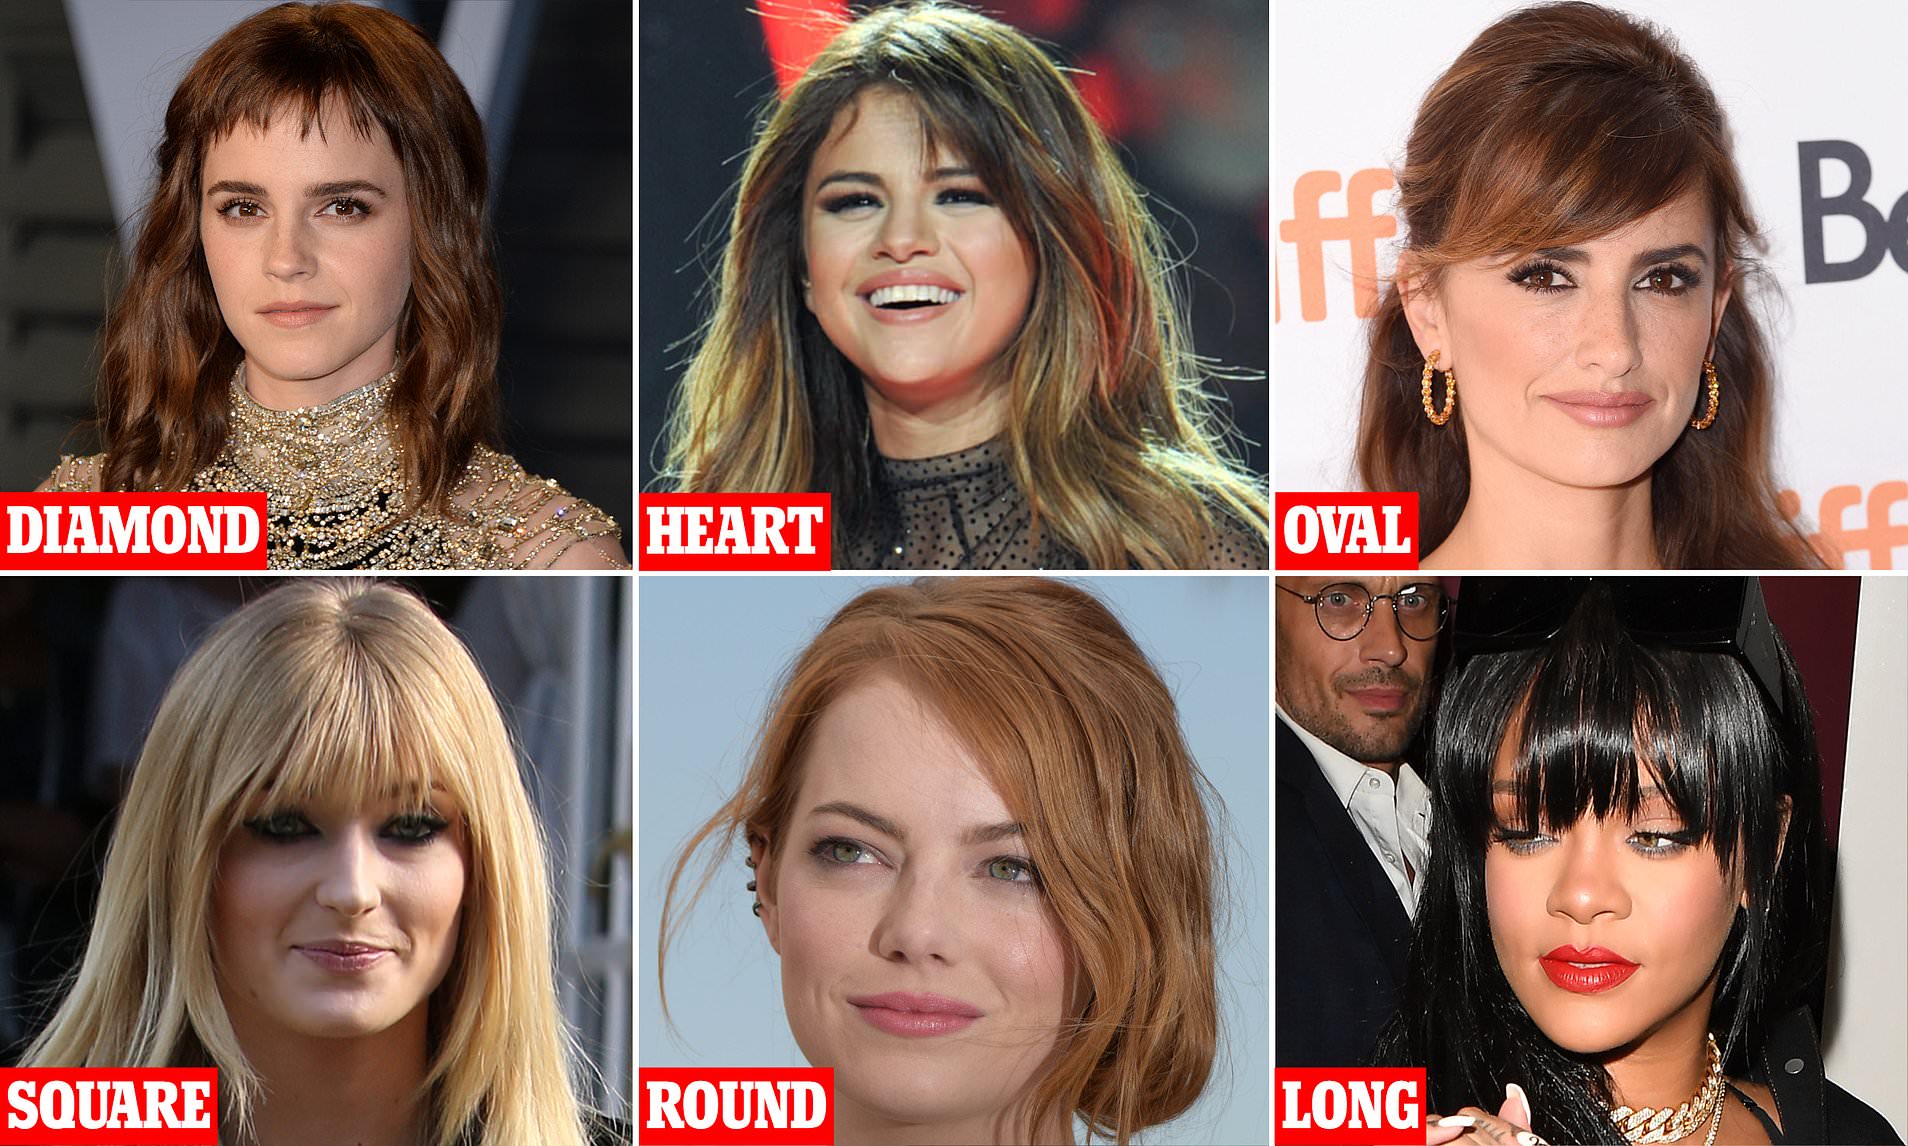 7. "Blonde Hair With Bangs: Different Styles to Suit Your Face Shape" - wide 1